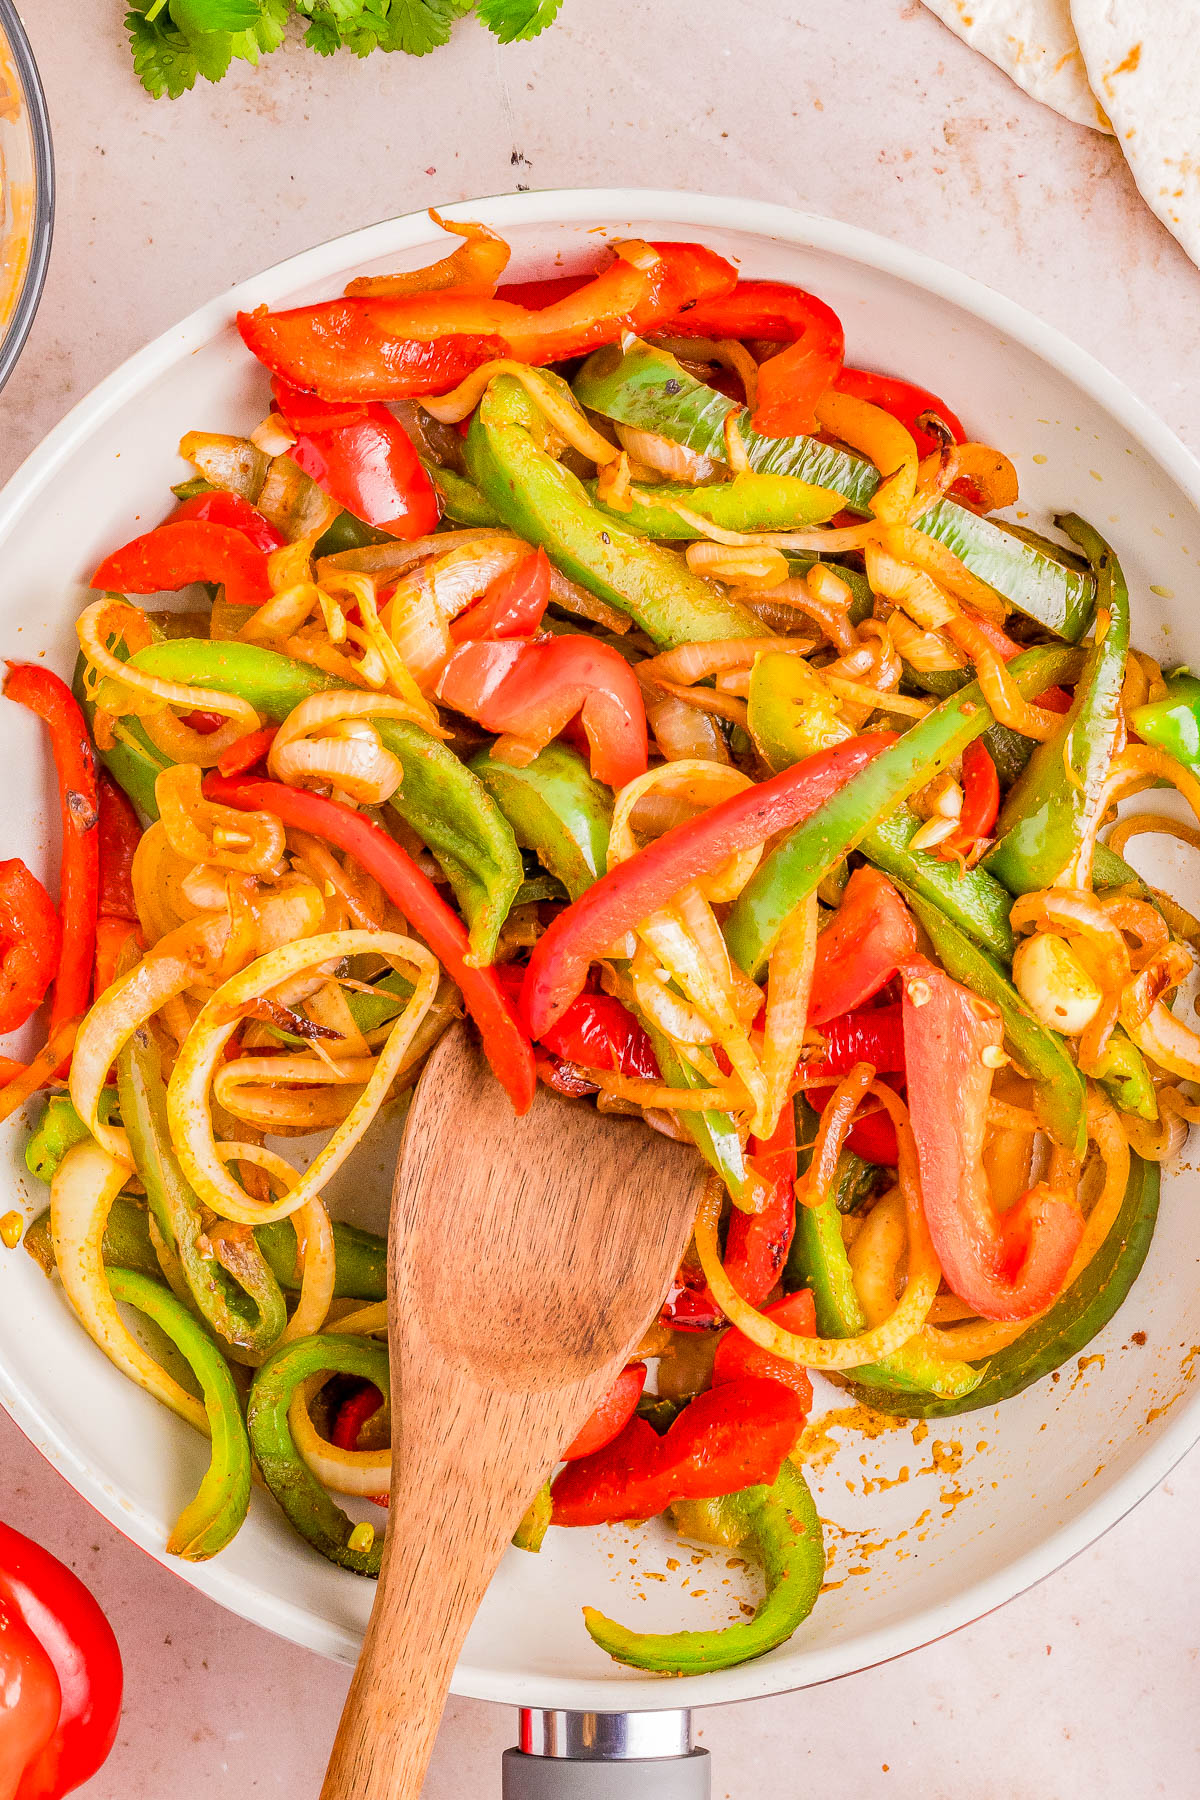 A pan filled with sautéed red, green, and yellow bell peppers and onions, mixed with a wooden spoon.